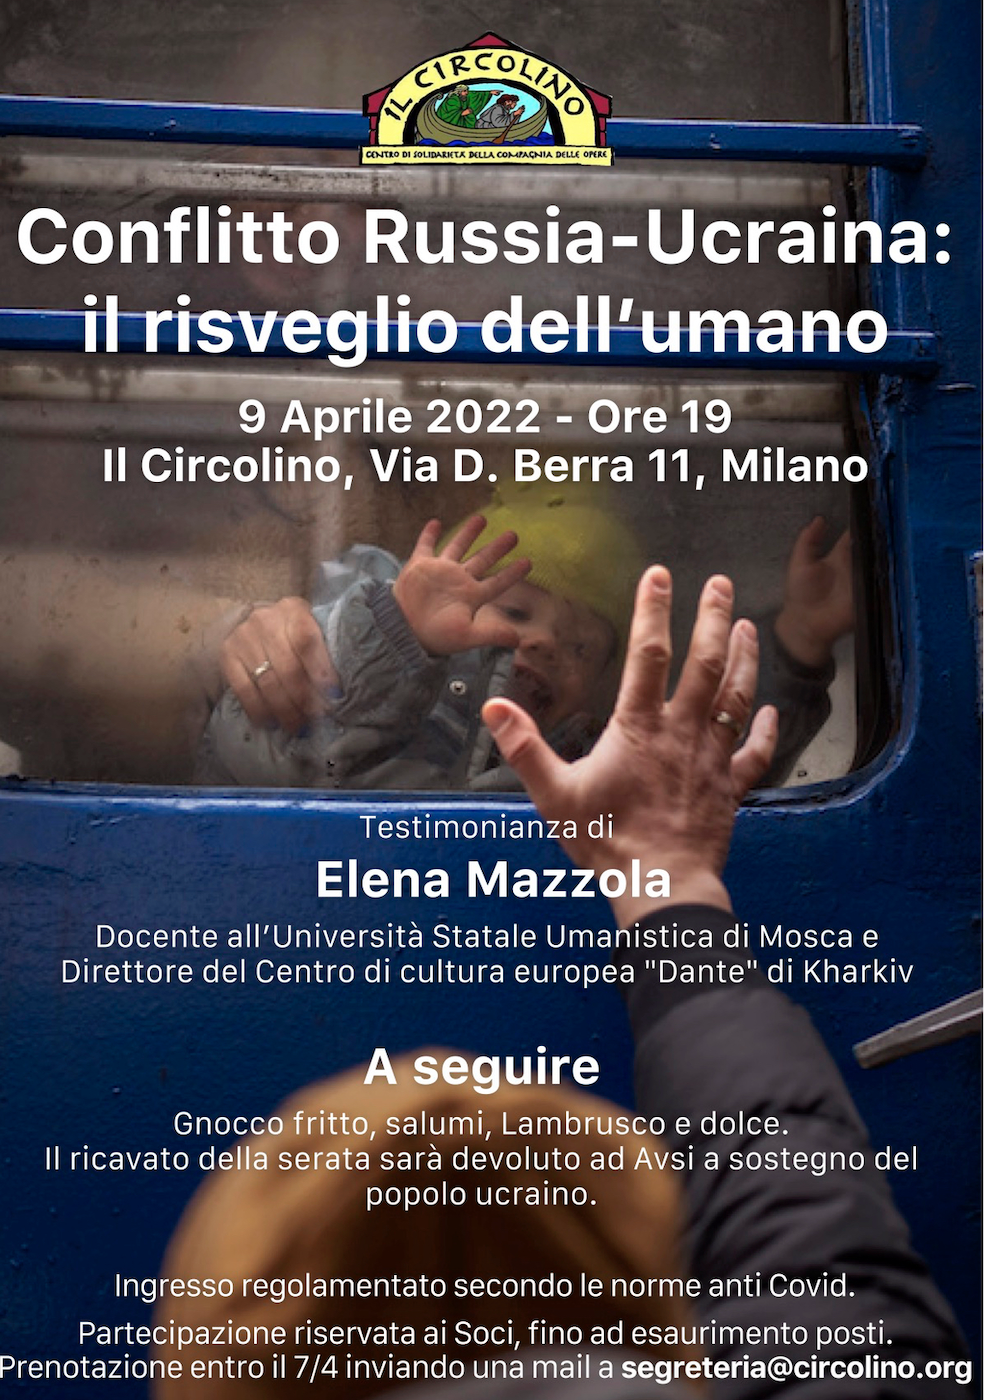 Featured image for “Milano: Conflitto Russia-Ucraina”